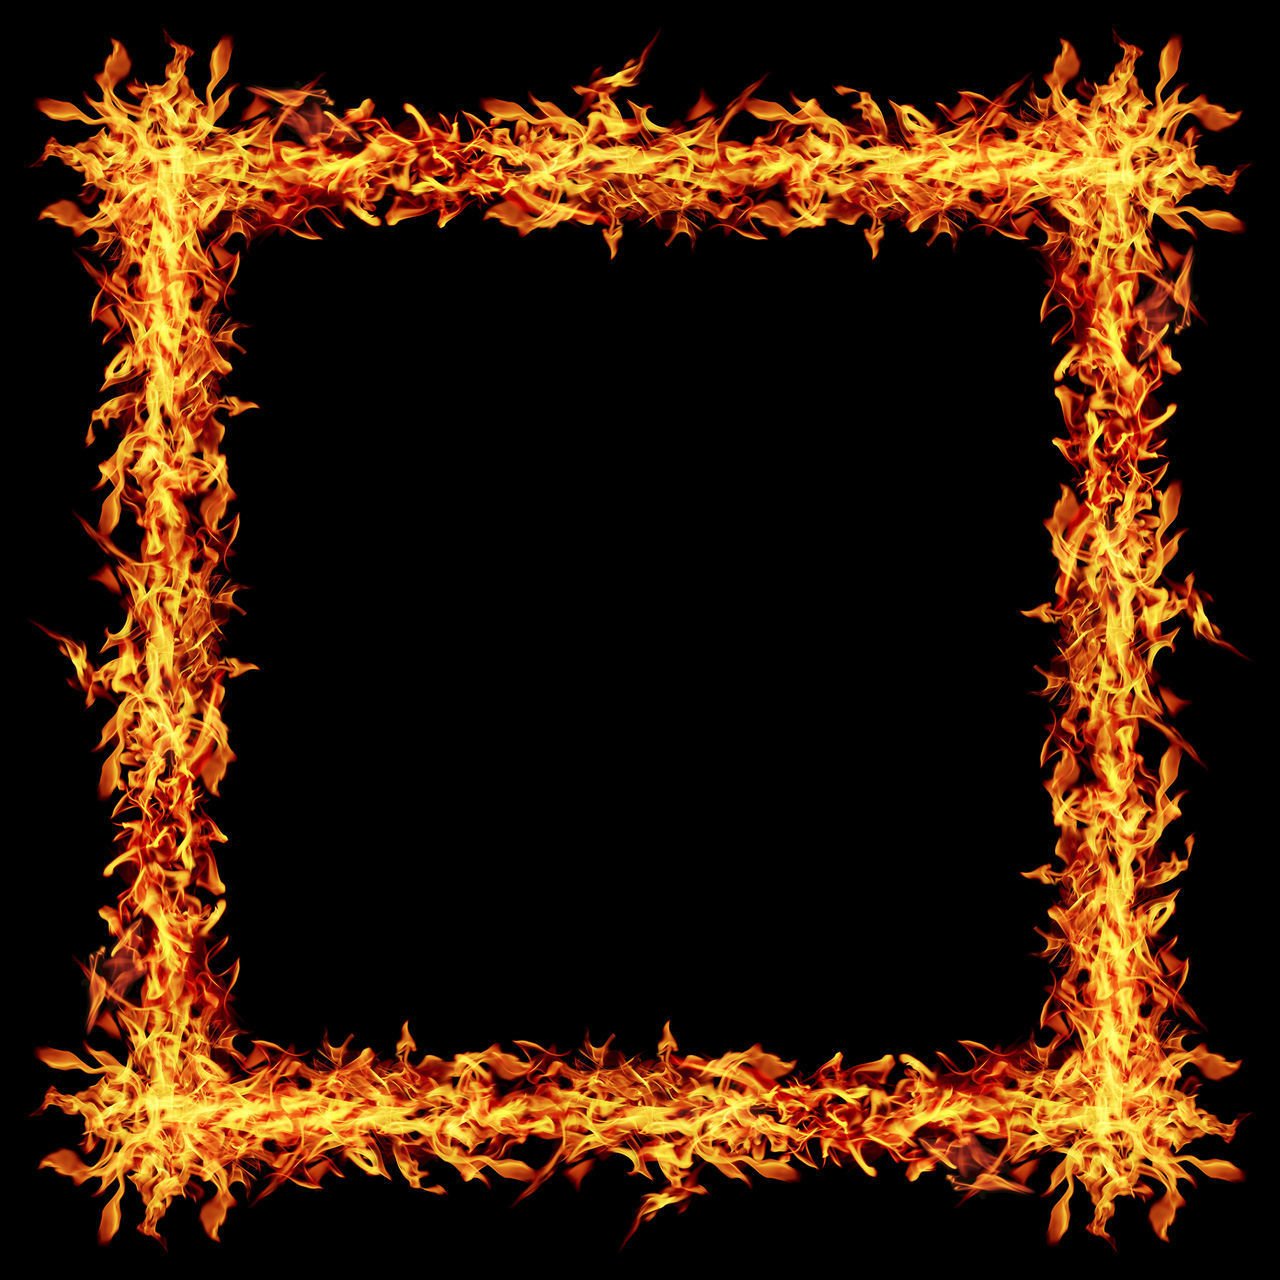 DIGITAL COMPOSITE IMAGE OF FIRE AND BLACK BACKGROUND